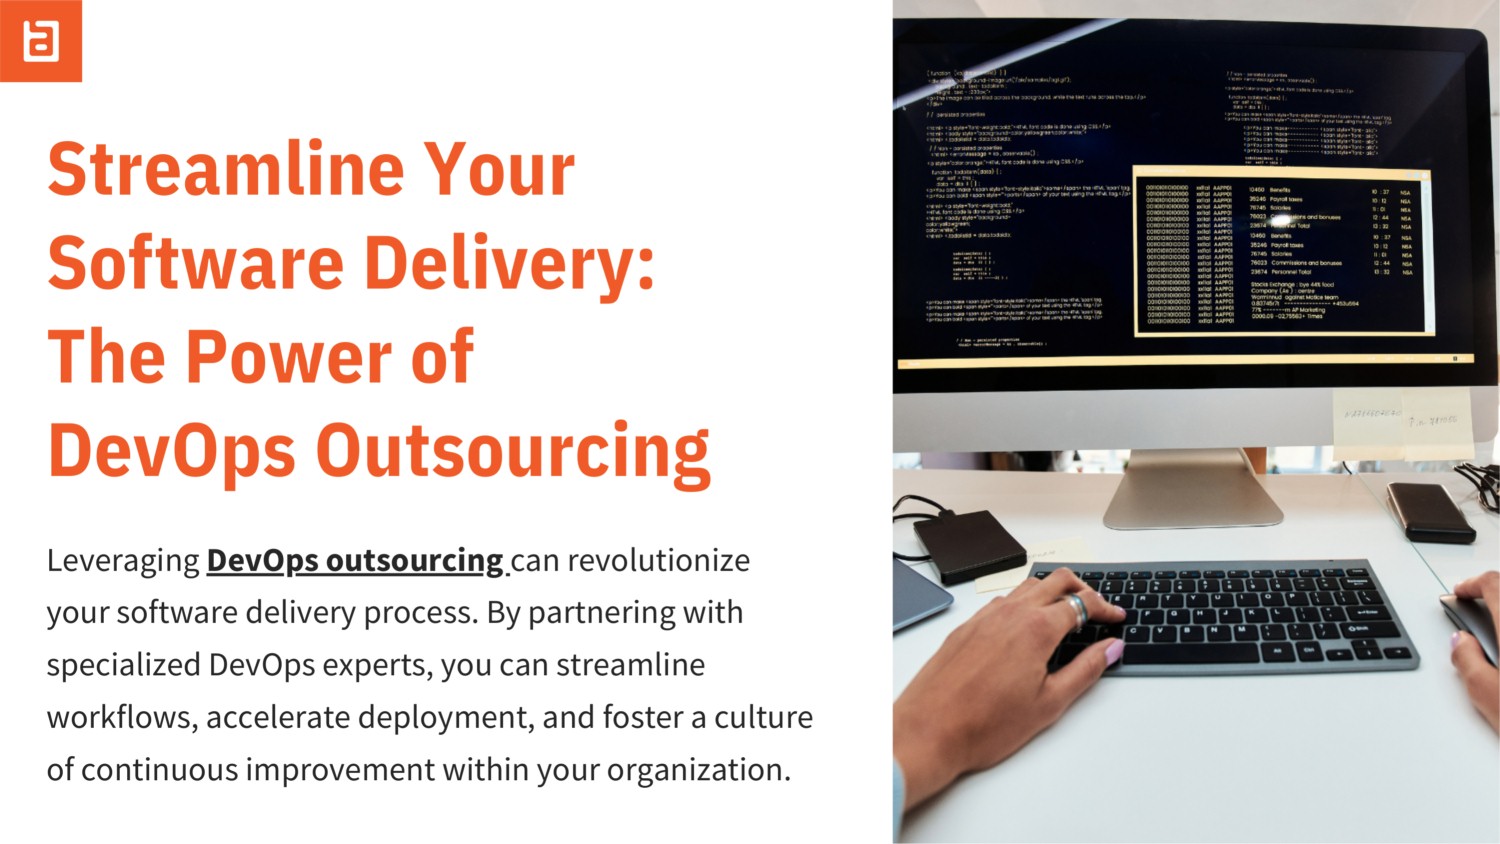 Streamline Your Software Delivery The Power of DevOps Outsourcing